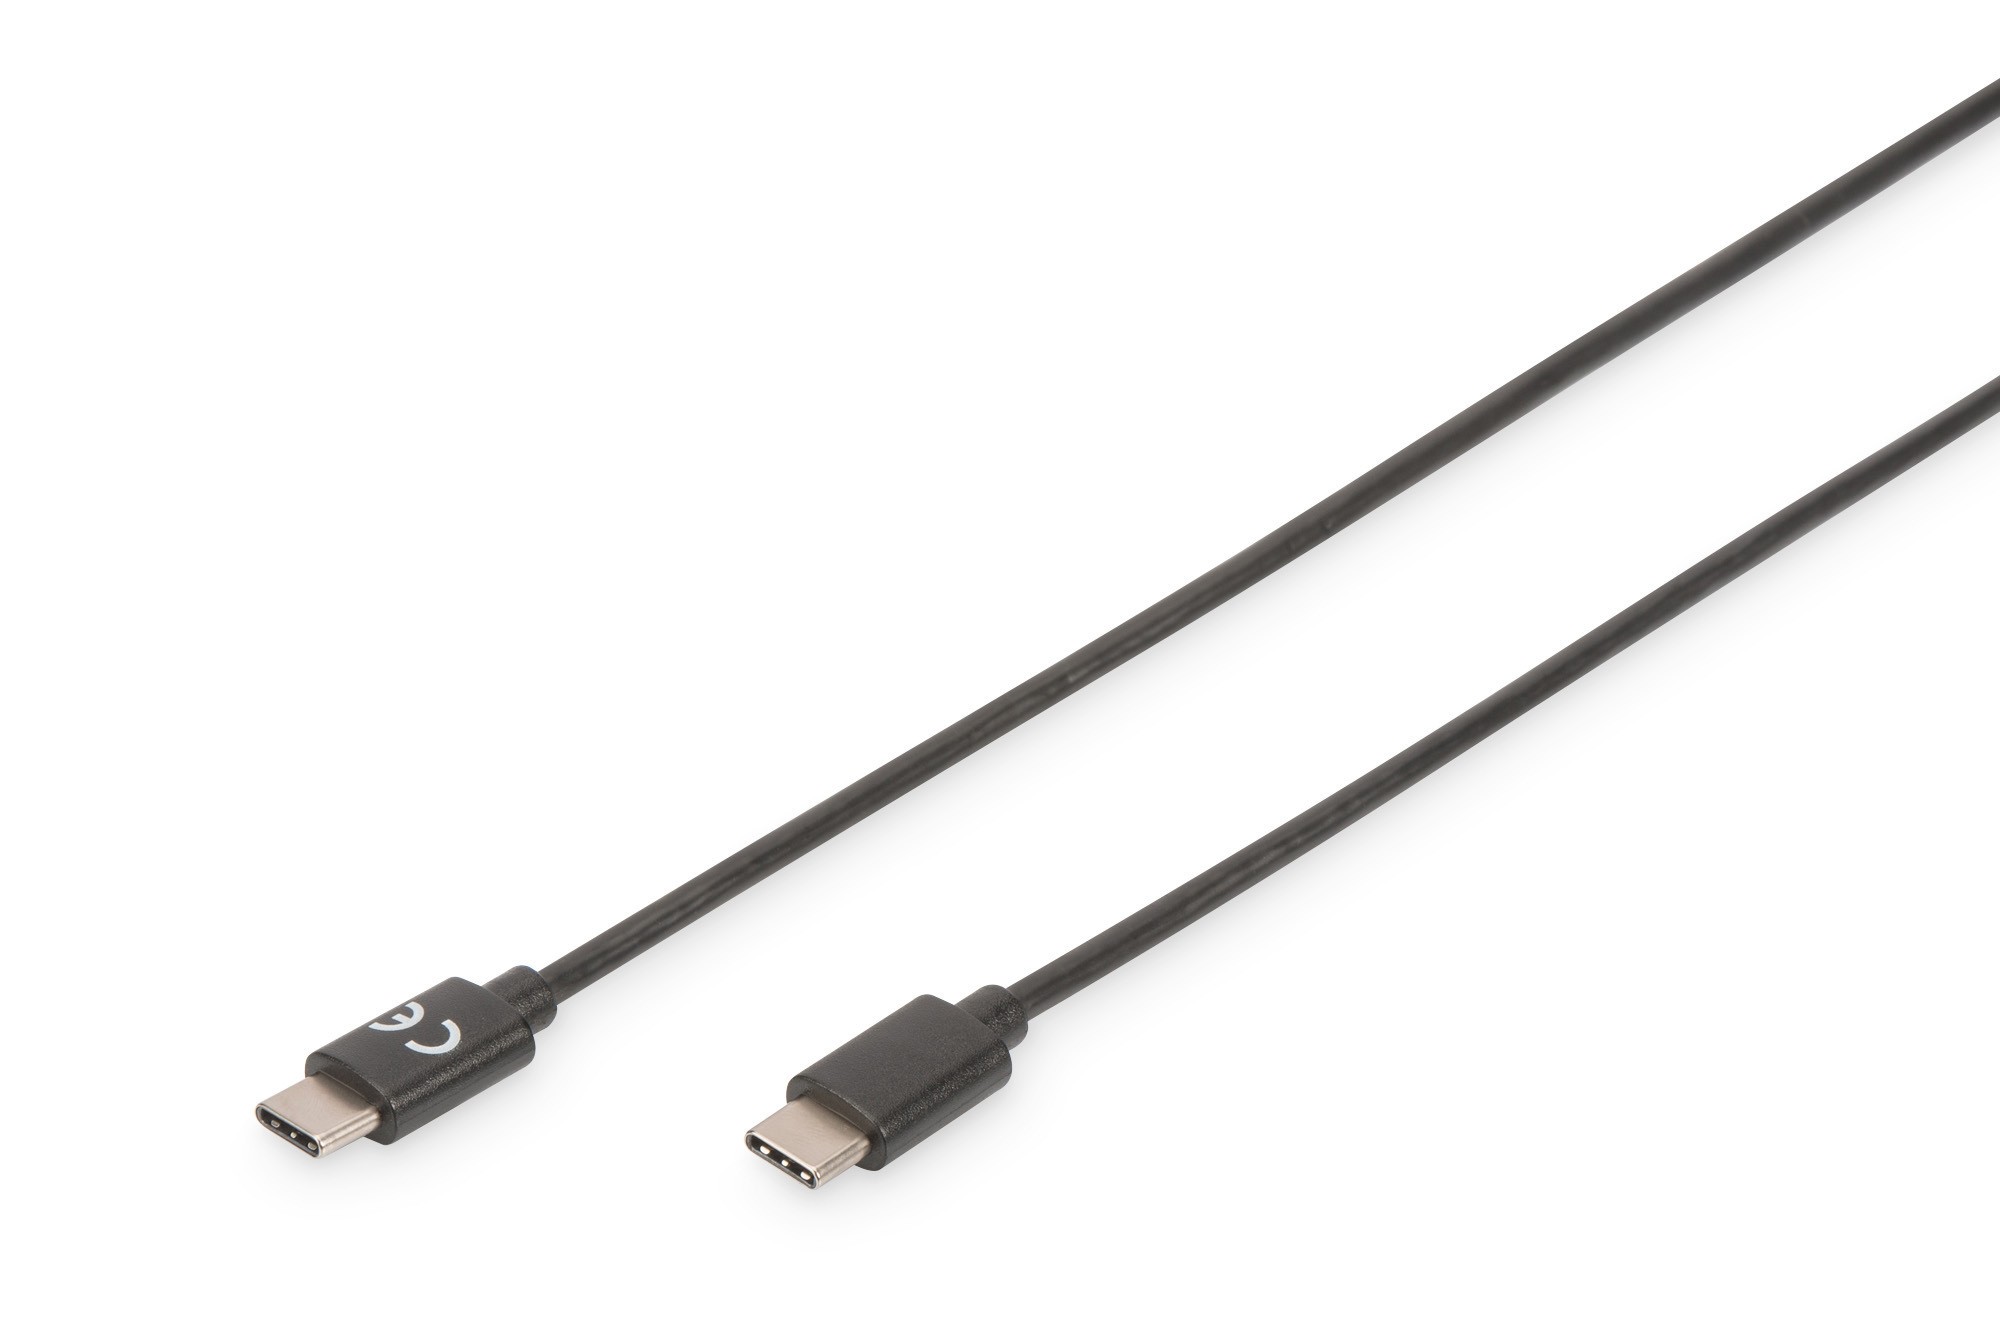 USB 3.0 SuperSpeed Cable A Male > Micro B Male - Length: 1.80m